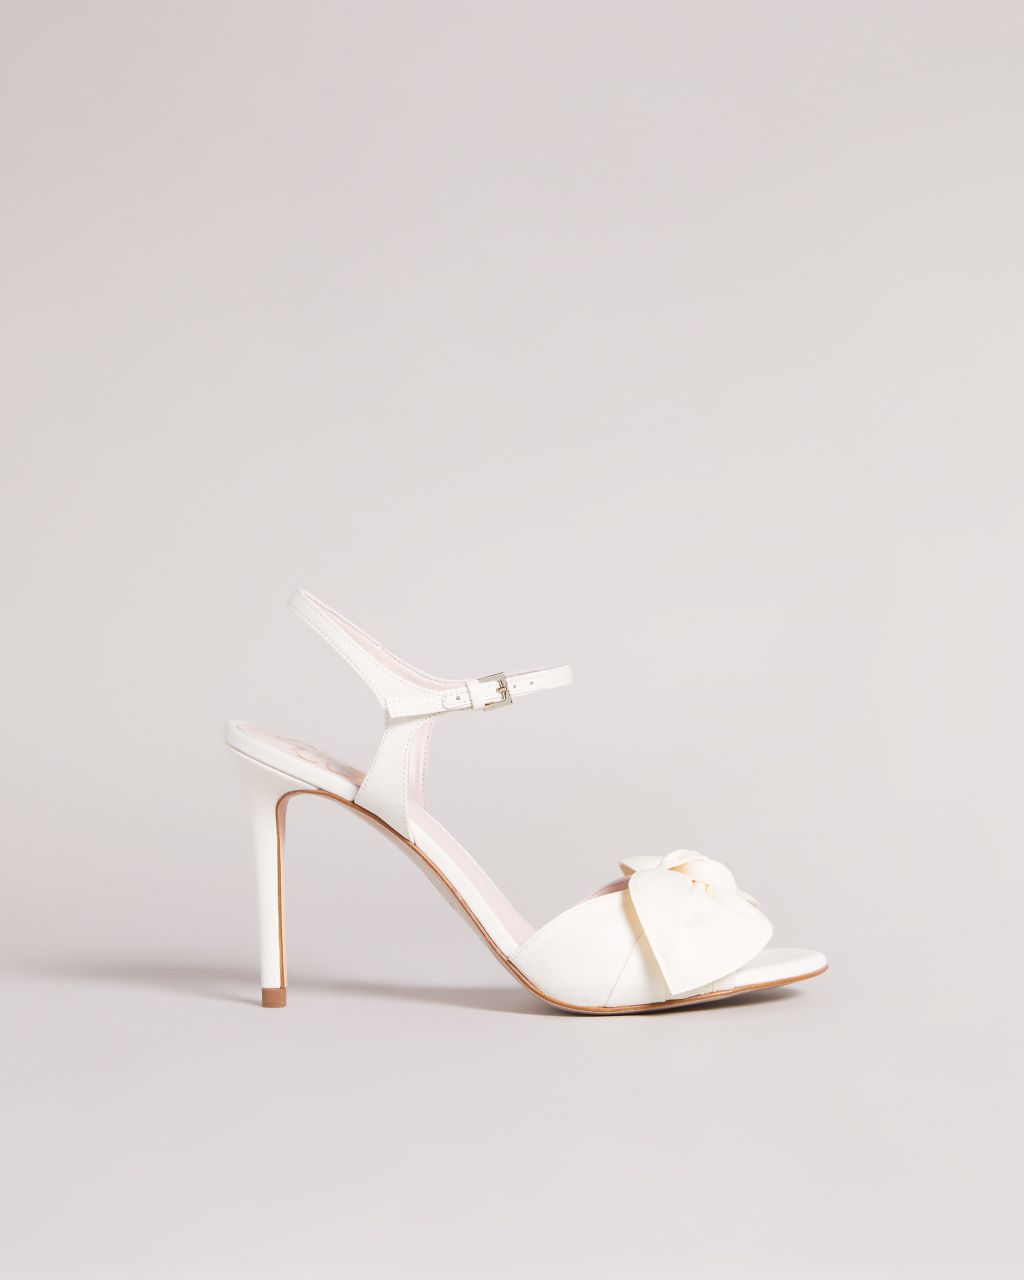 Ted Baker Women's Moire Satin Bow Heeled Sandals in Ivory, Heevia